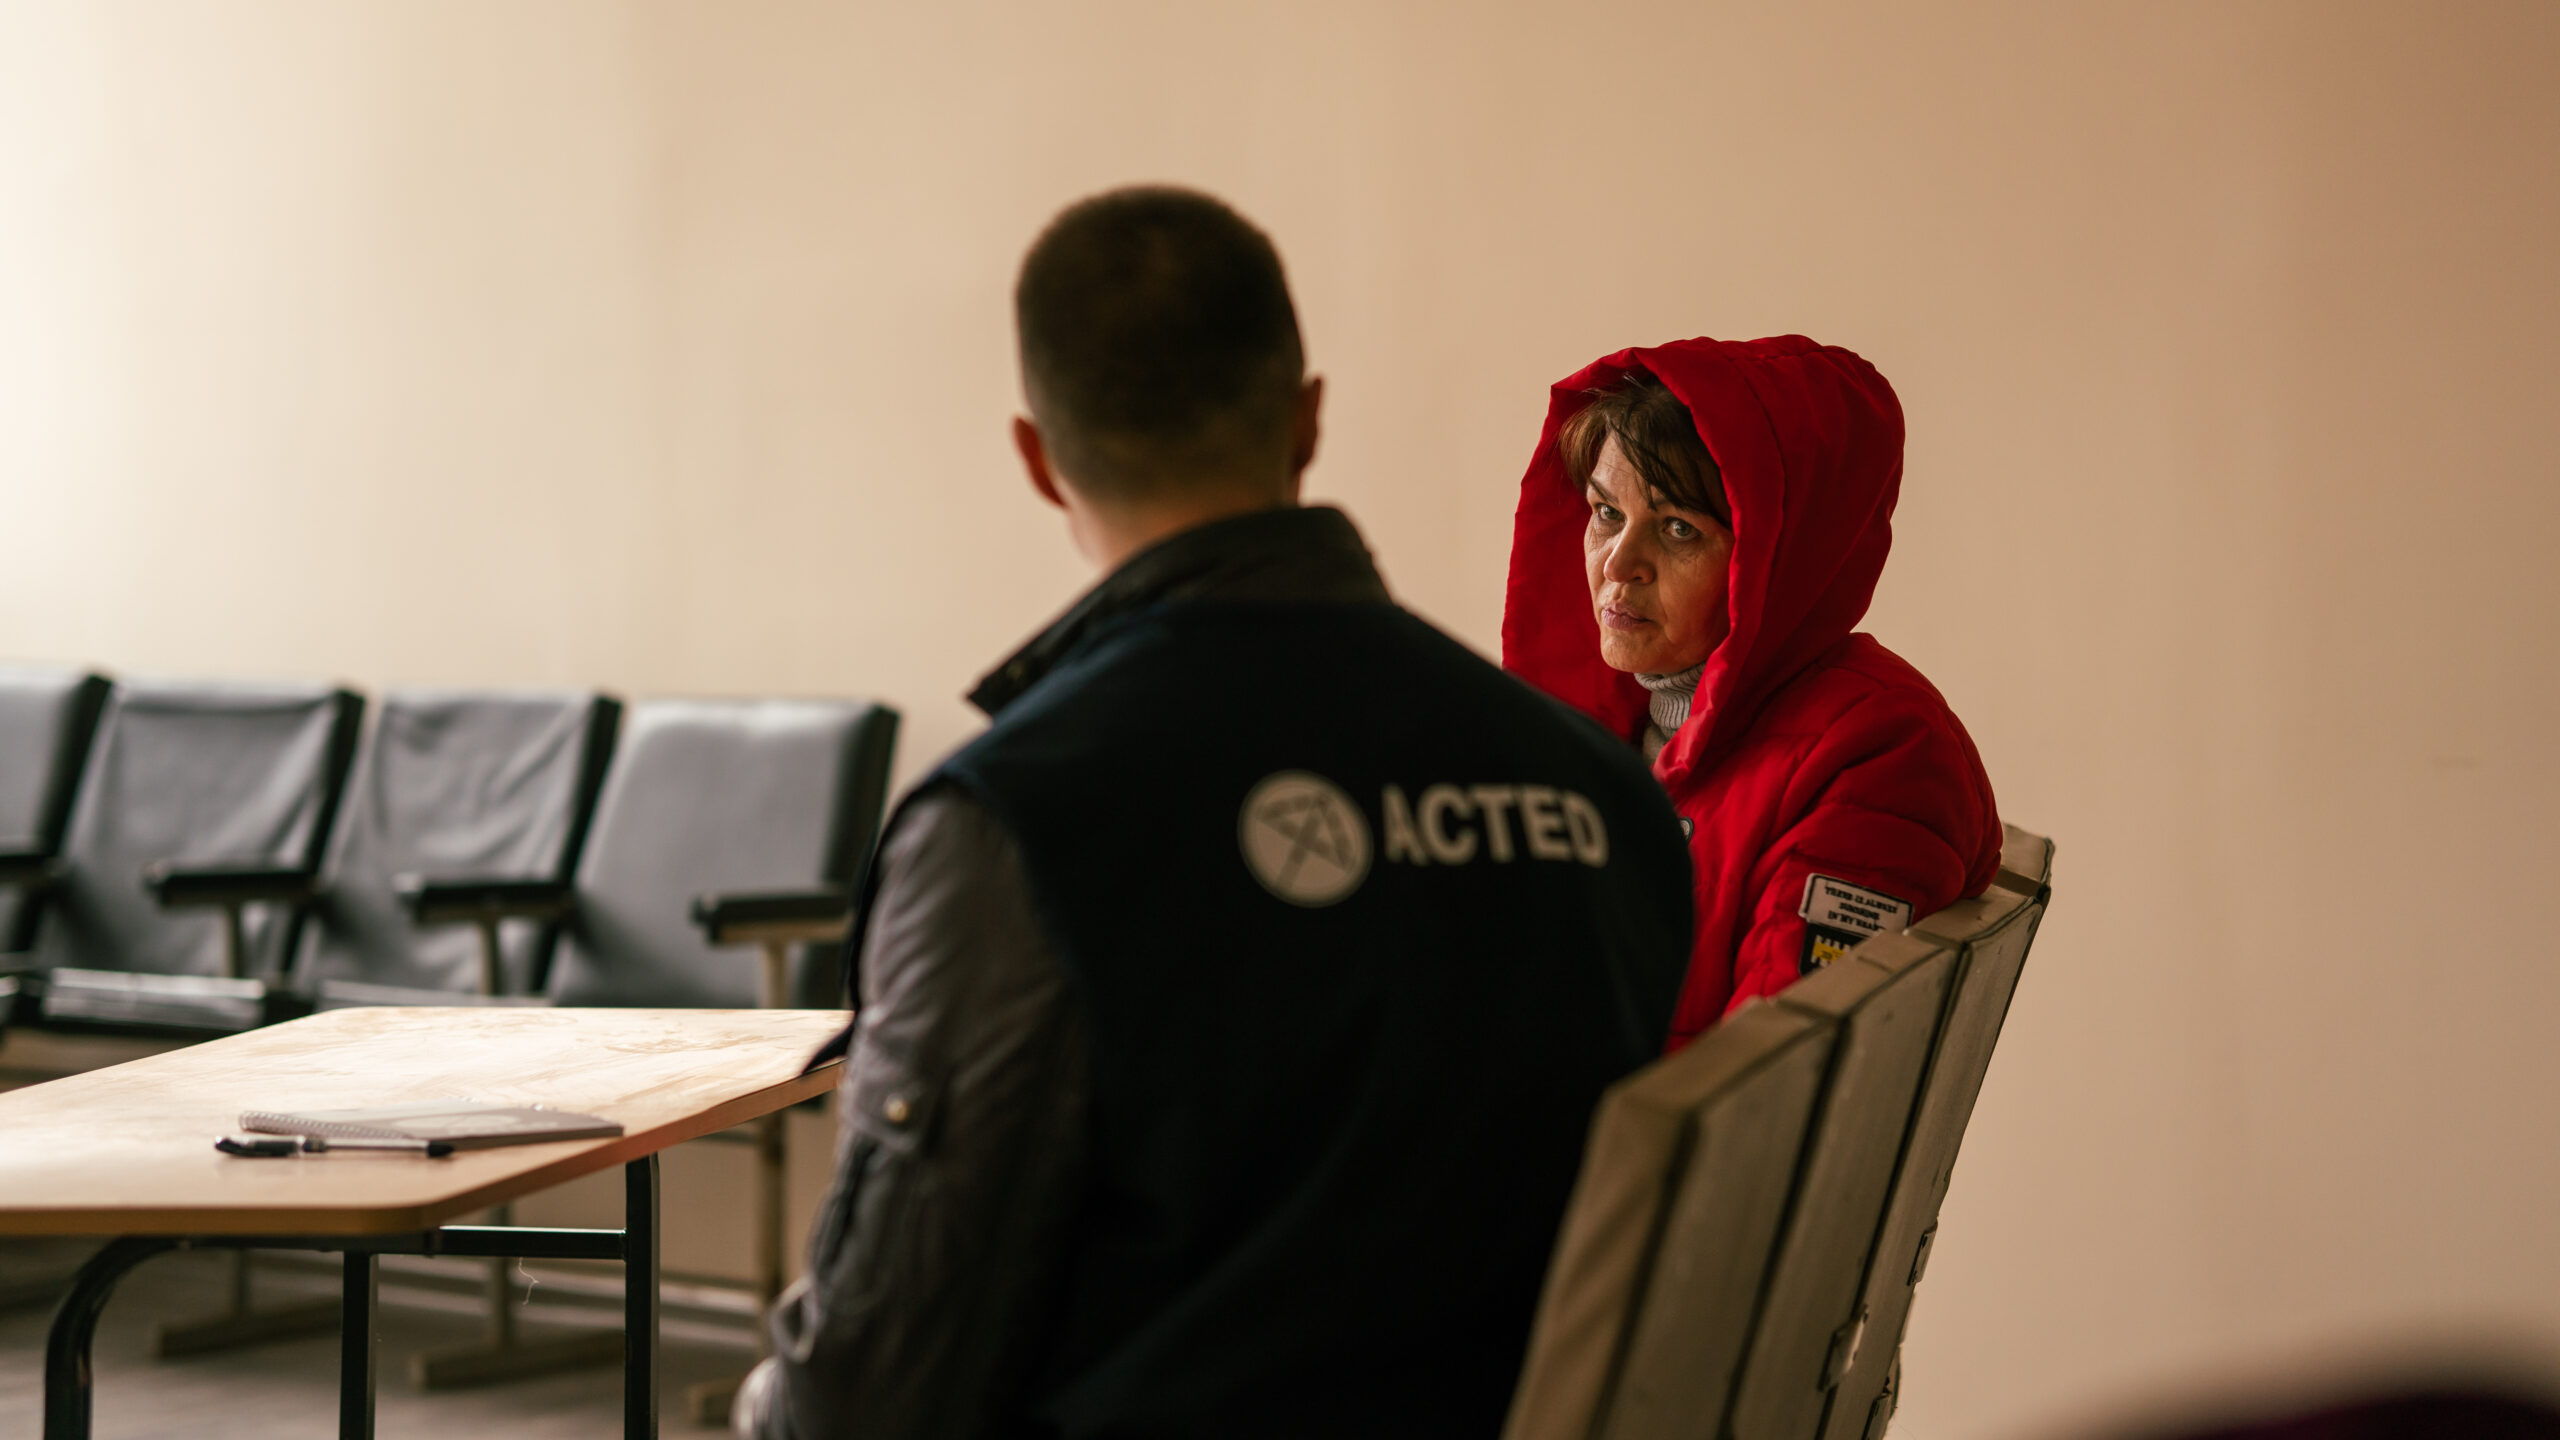 In Ukraine, Acted supports war-affected people who fled their villages with multi-purpose cash assistance photo